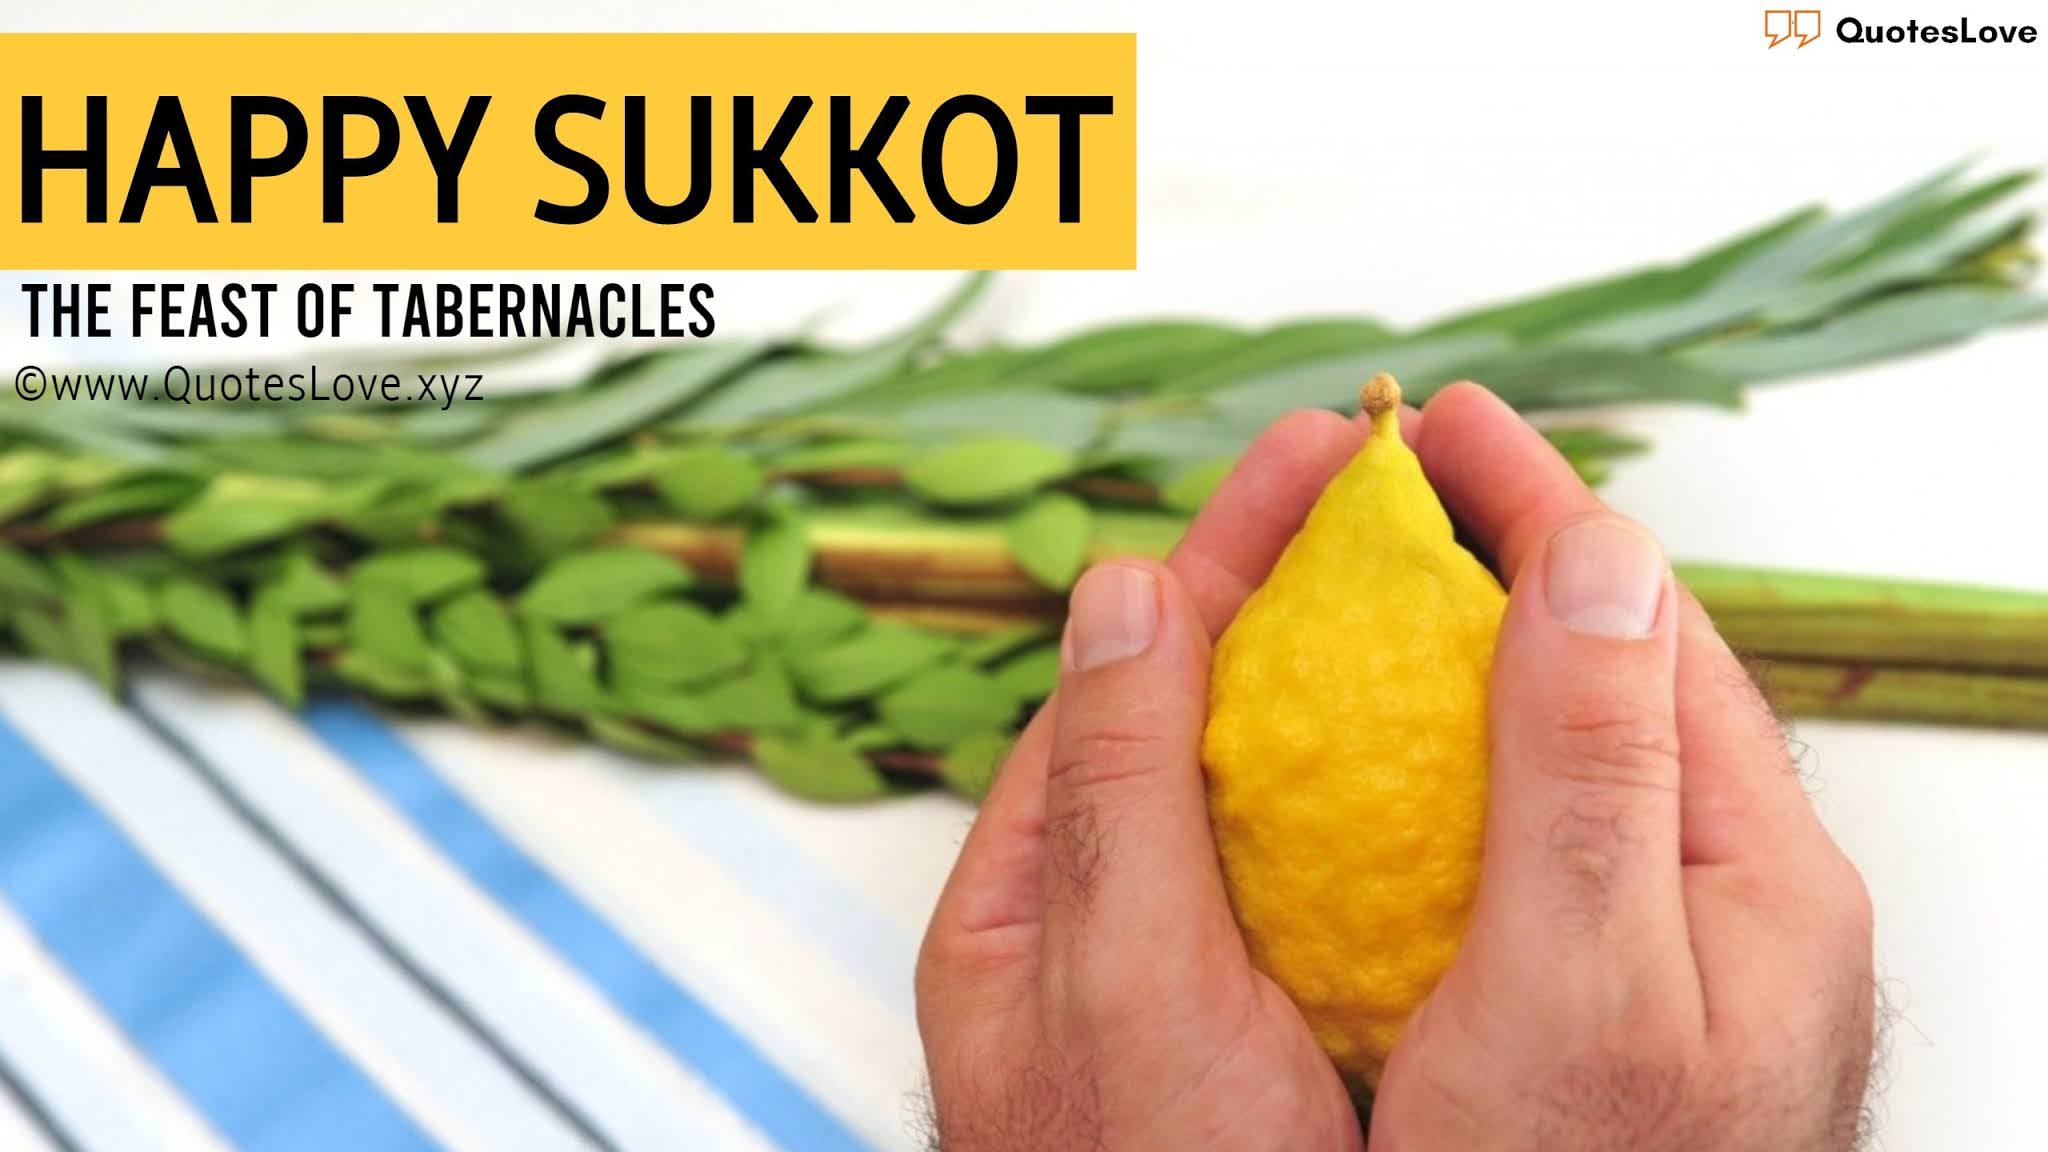 Sukkot Wishes, Quotes, Sayings, Greetings, Messages, Meaning, Images, Pictures, Posters